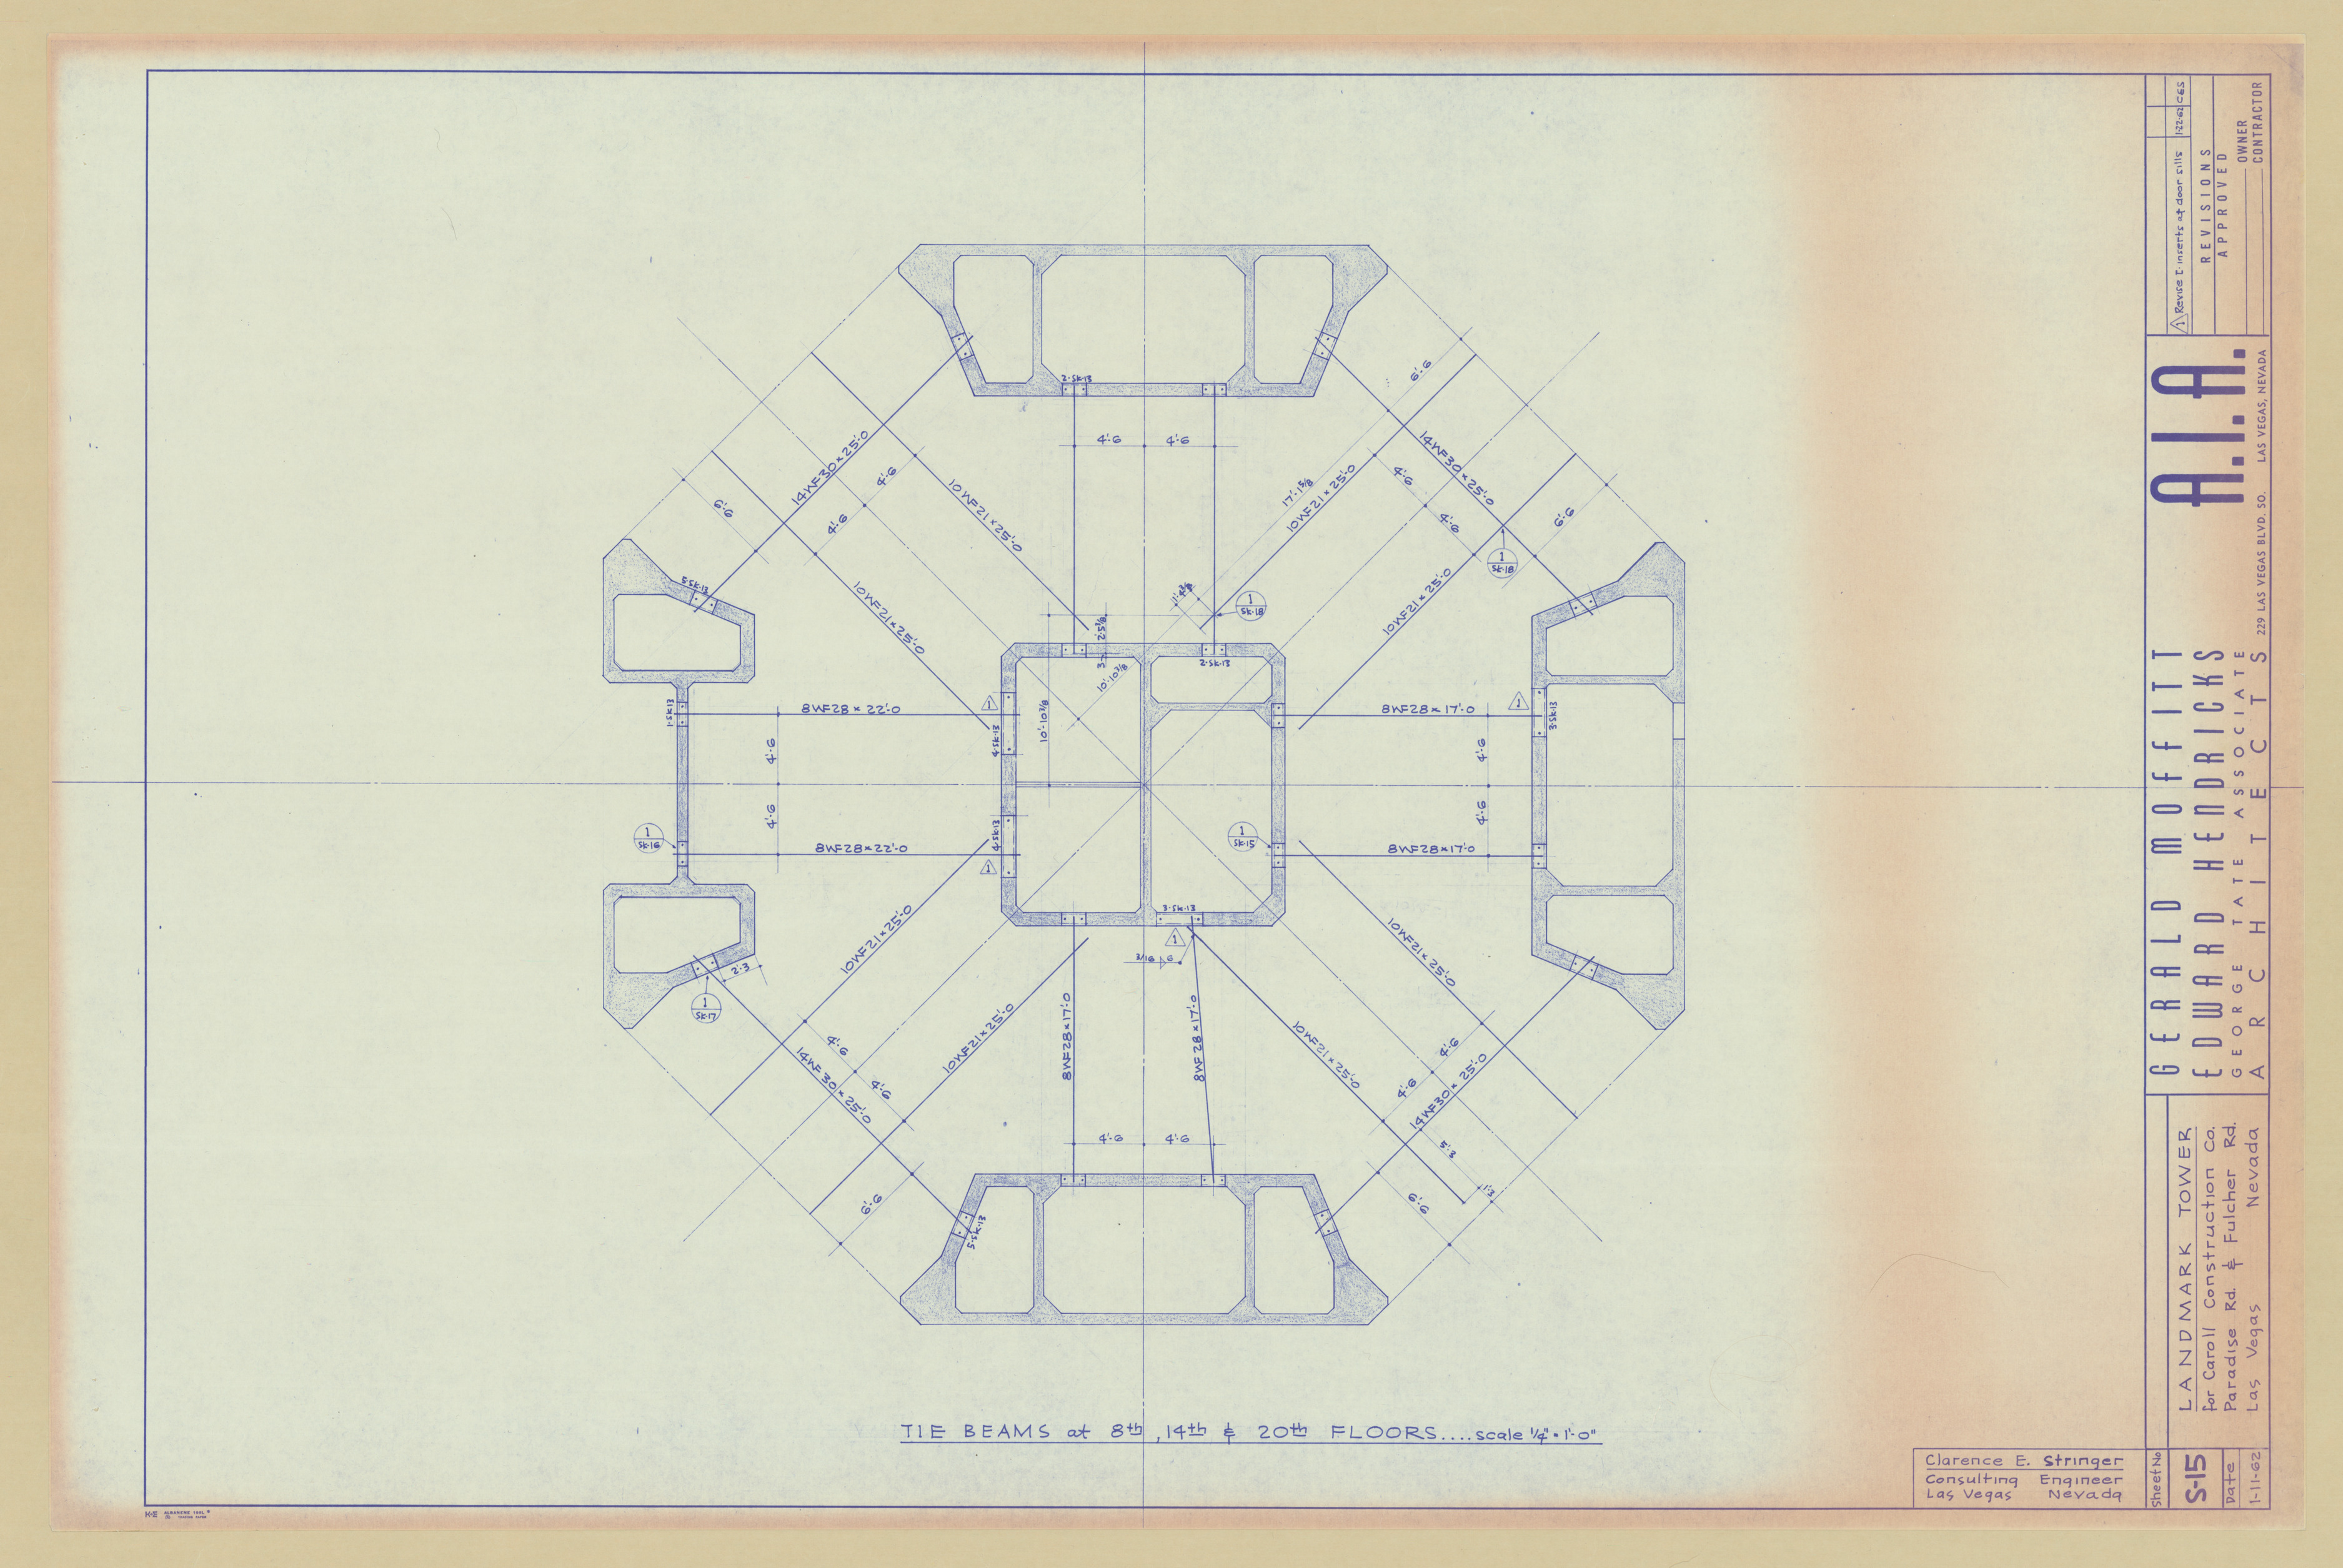 Original Landmark Tower structural drawings, sheets S1-S105: architectural drawings, image 016